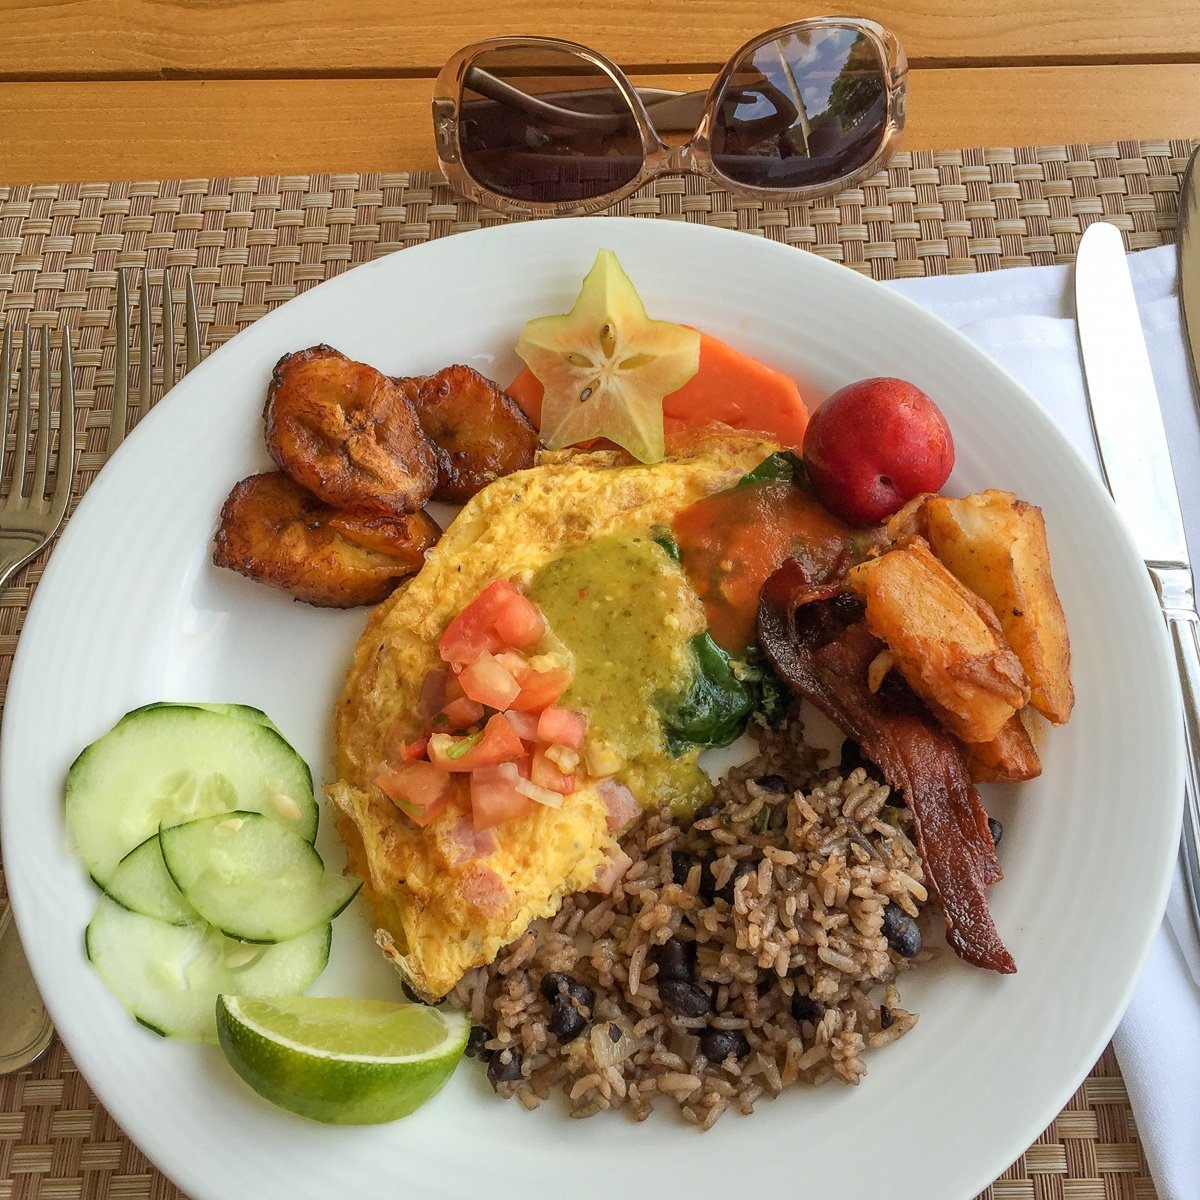 Breakfast with fresh fruit, made-to-order omelette and fried plantains at World Café